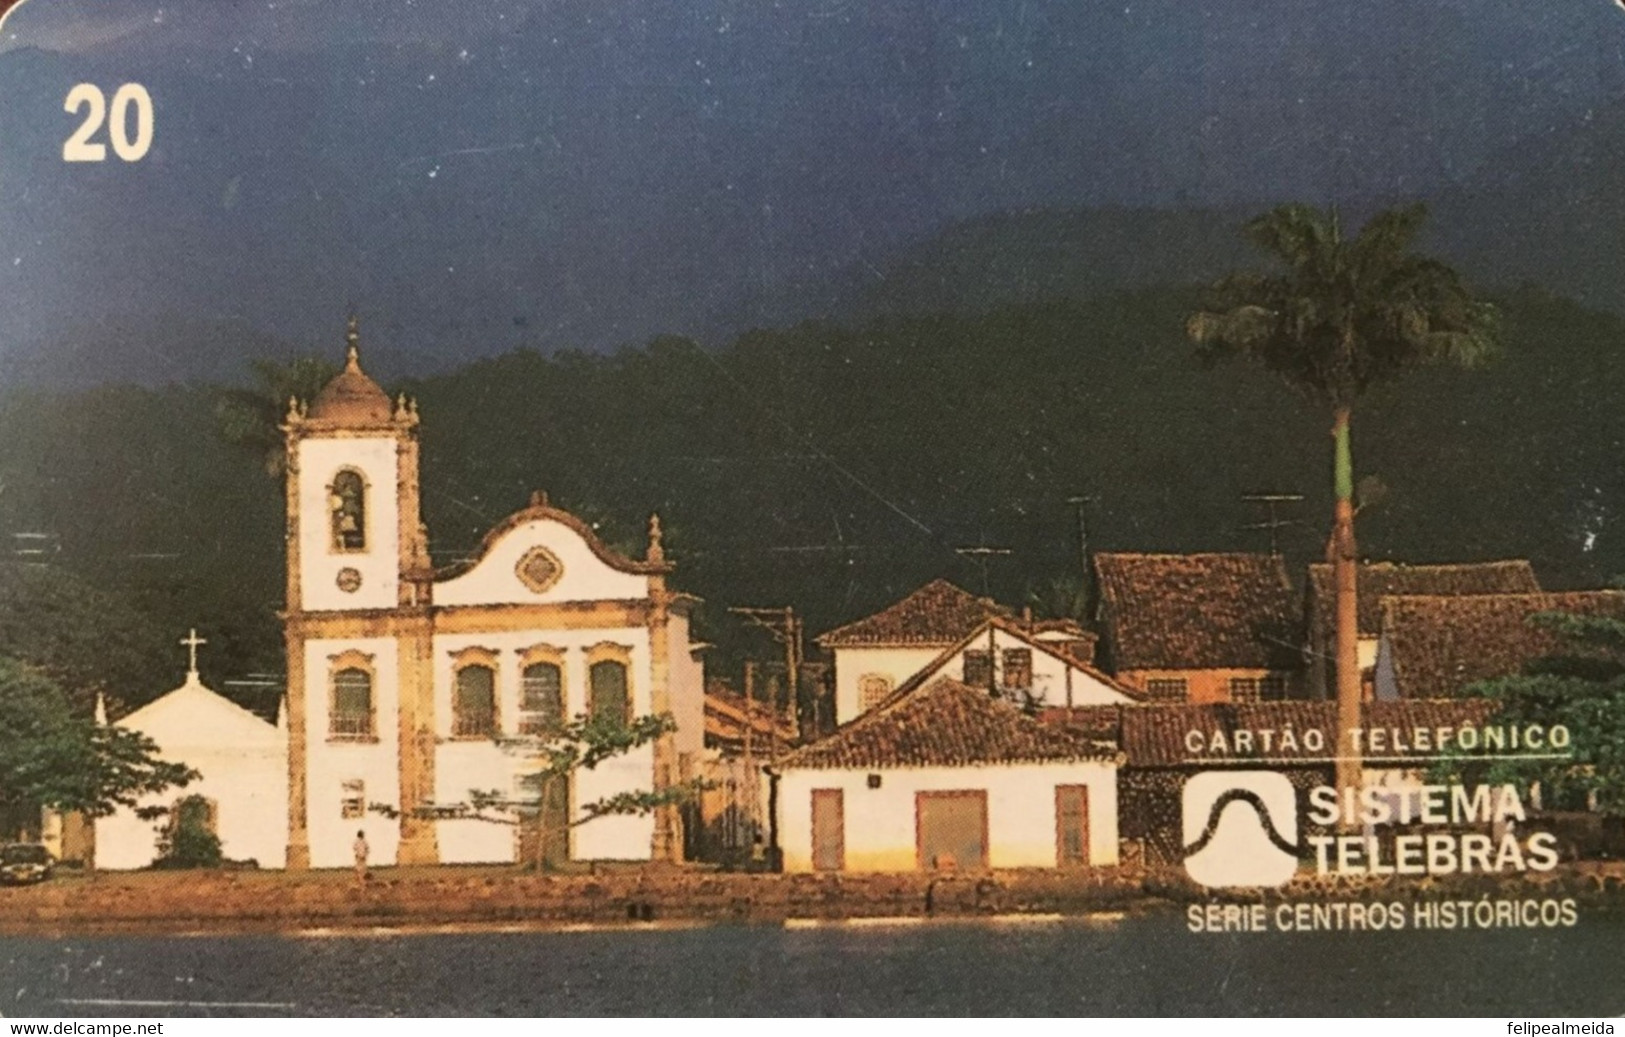 Phone Card Produced By Telebras In 1999 - Series Historic Centers - Photo Of The Building Of The National Historic Museu - Kultur